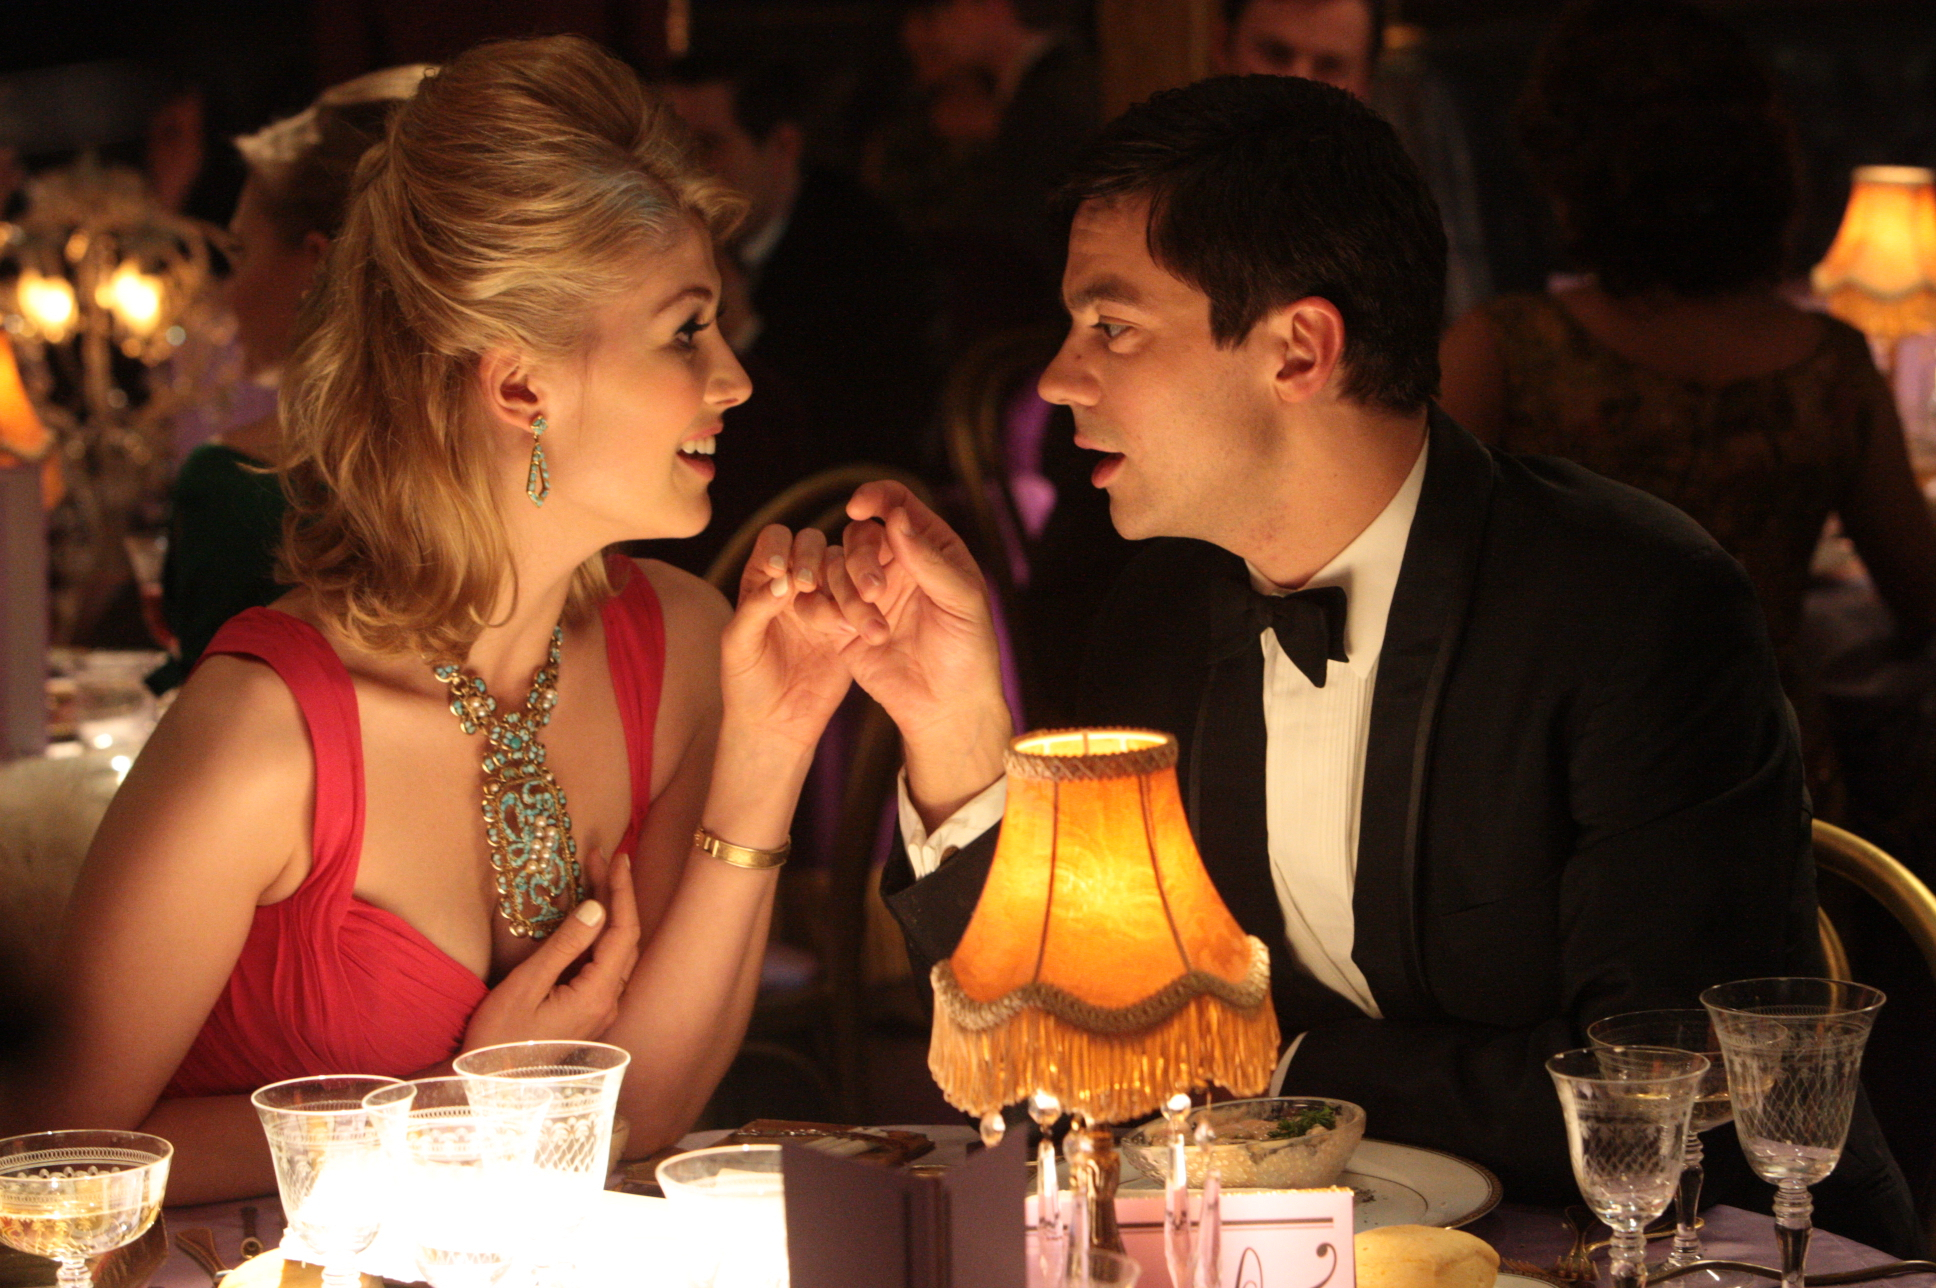 Rosamund Pike and Dominic Cooper in An Education (2009)